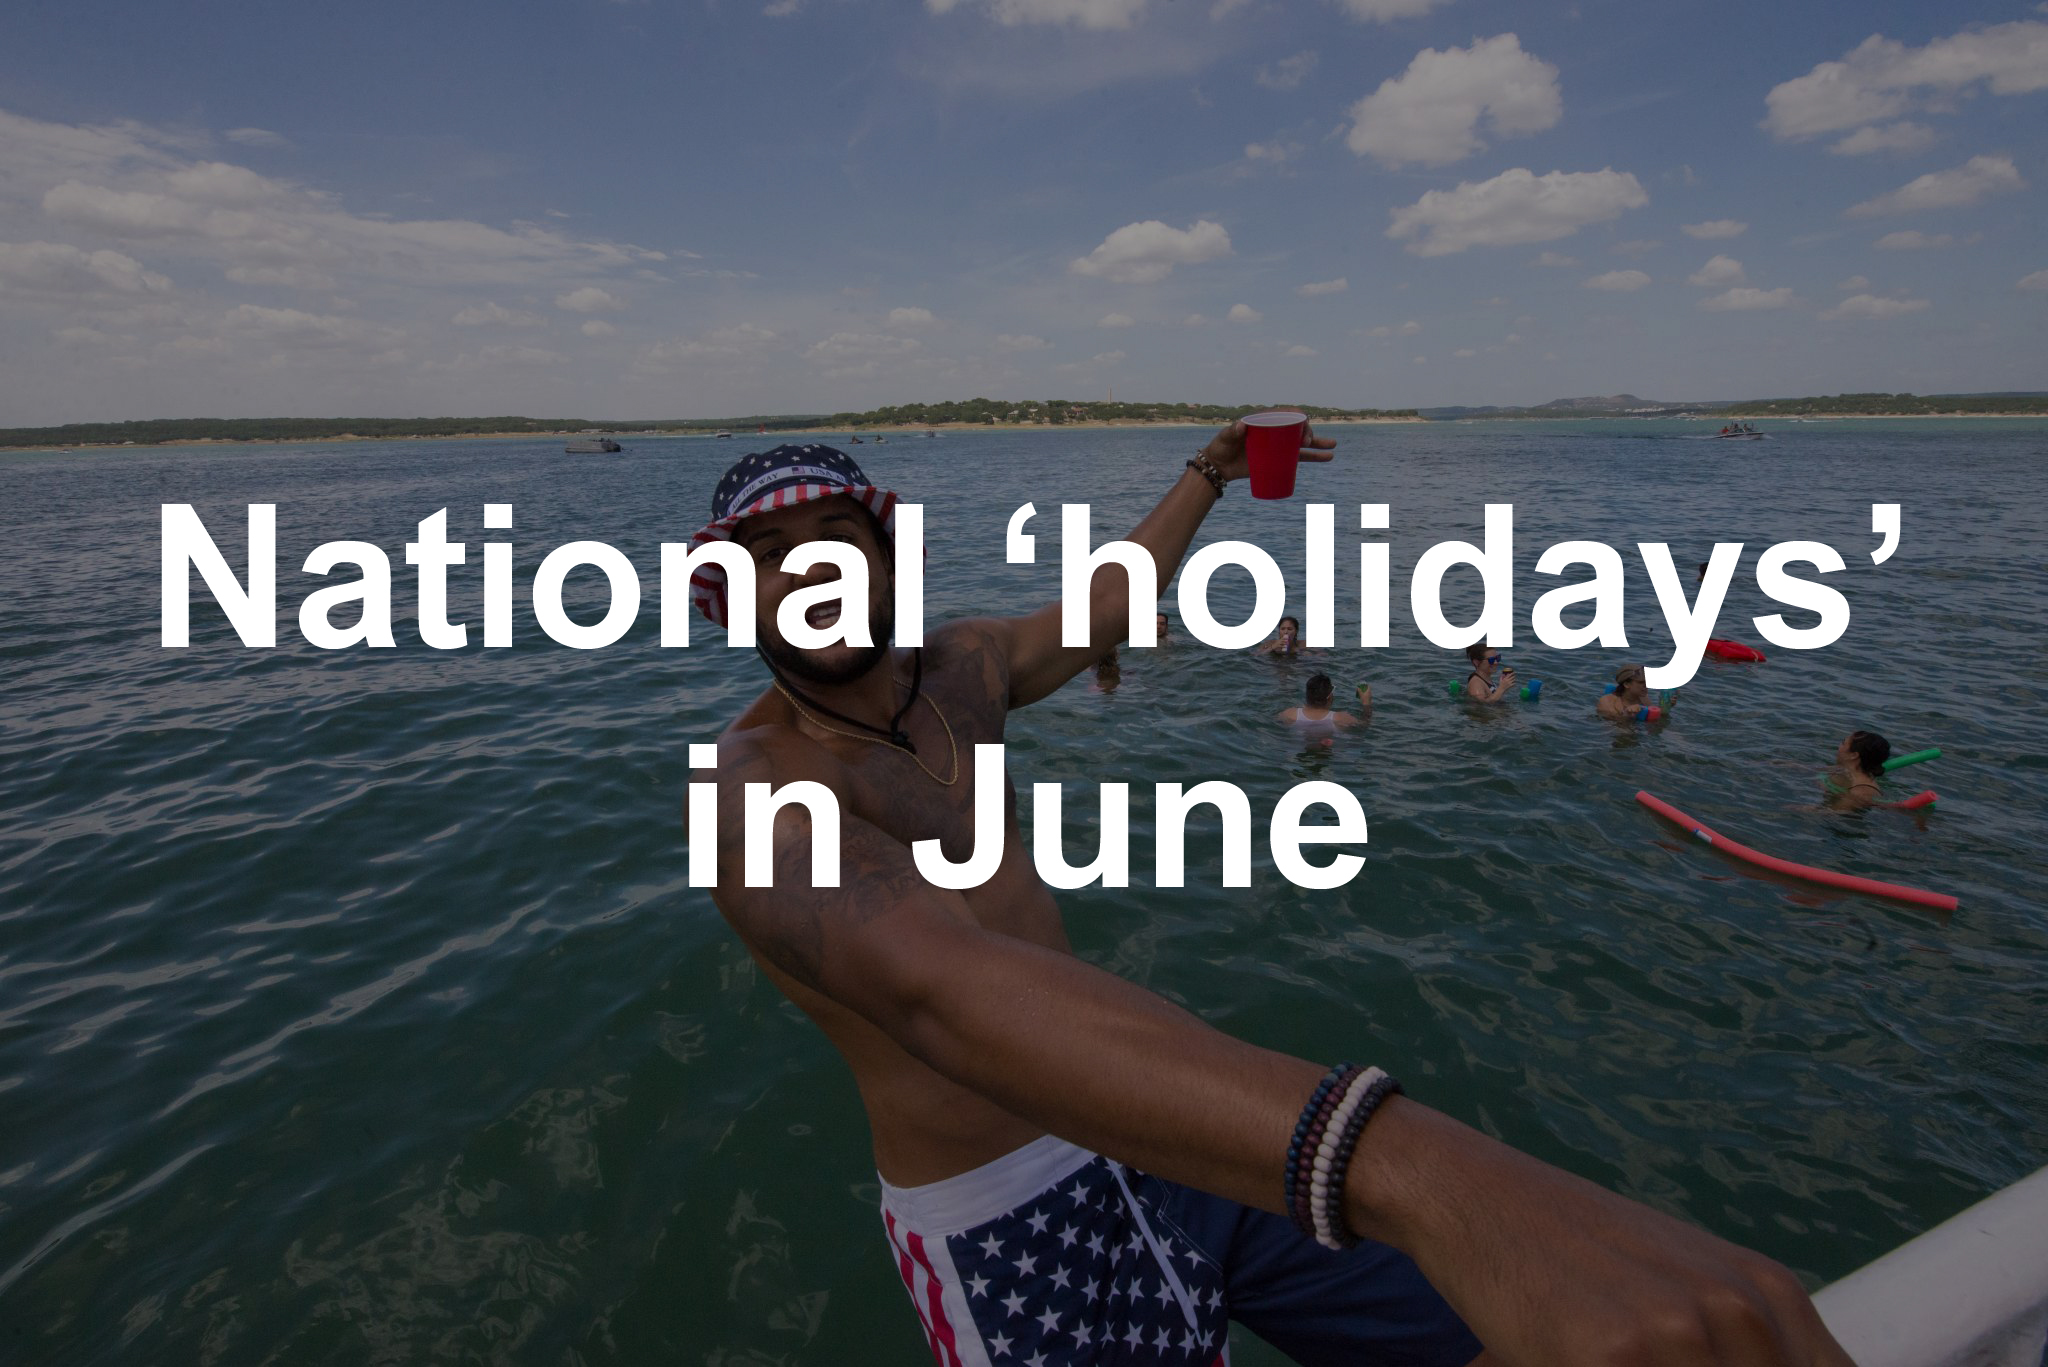 National "holidays" in June